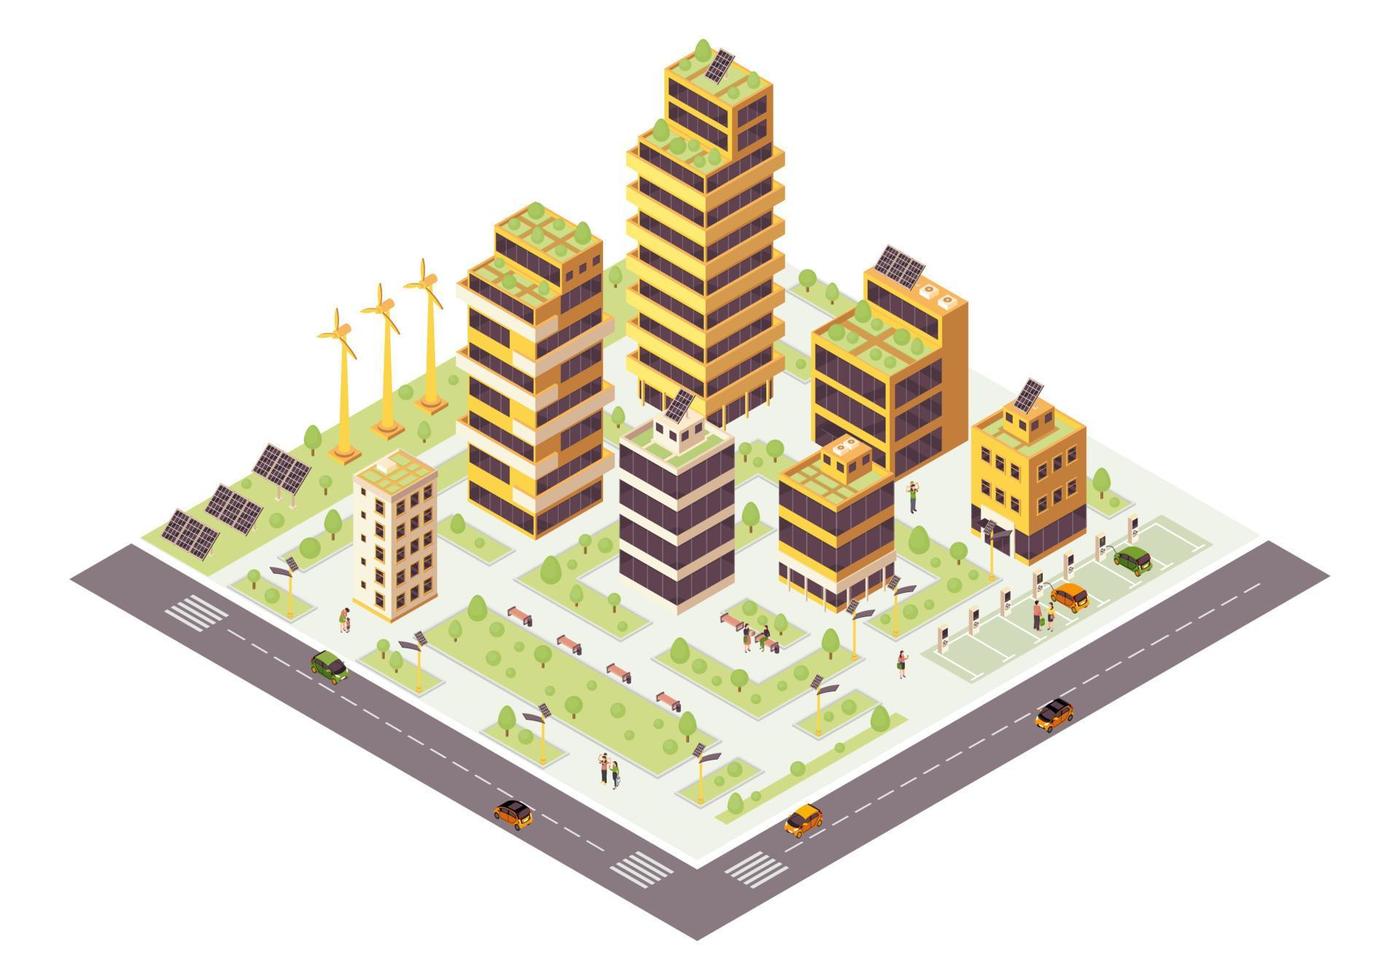 Eco city isometric color vector illustration. Smart city infographic. Renewable resources production. Green buildings 3d concept. Eco friendly, sustainable environment. Isolated design element